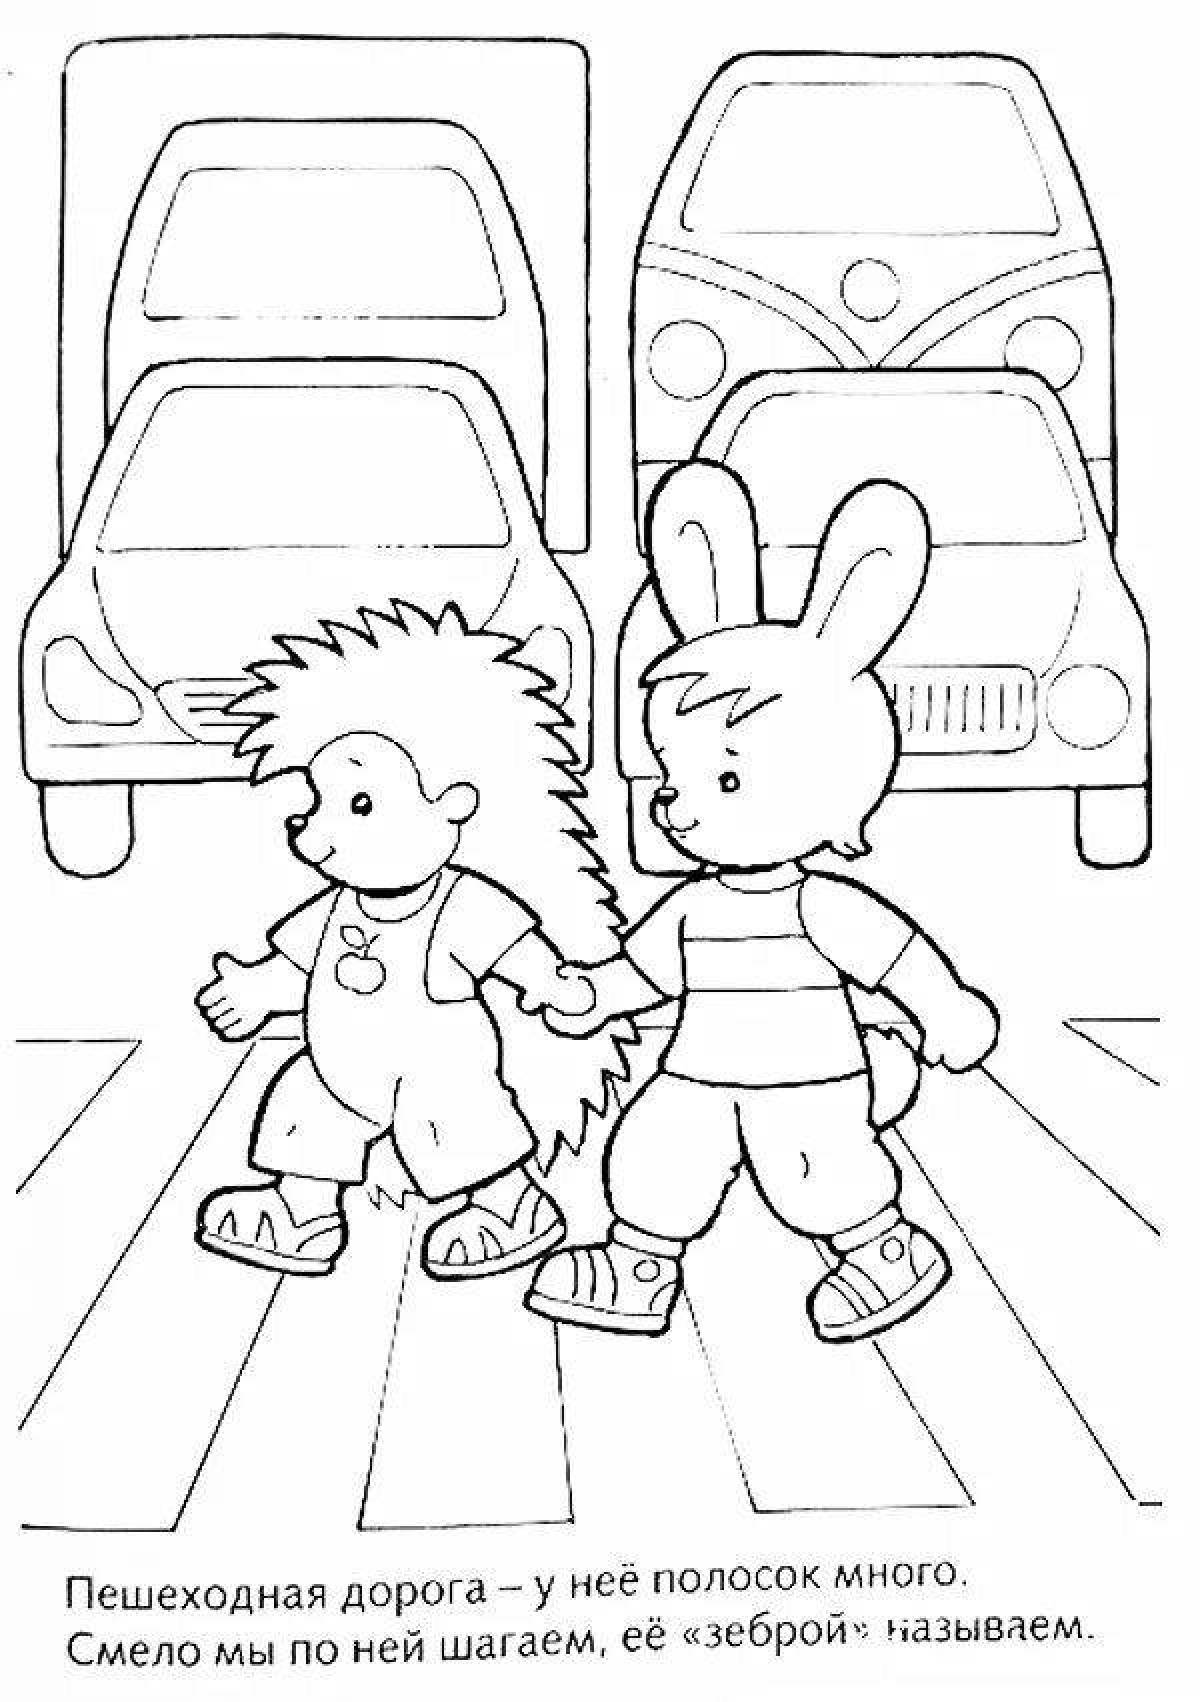 Bright traffic rules coloring book for kids 5-6 years old